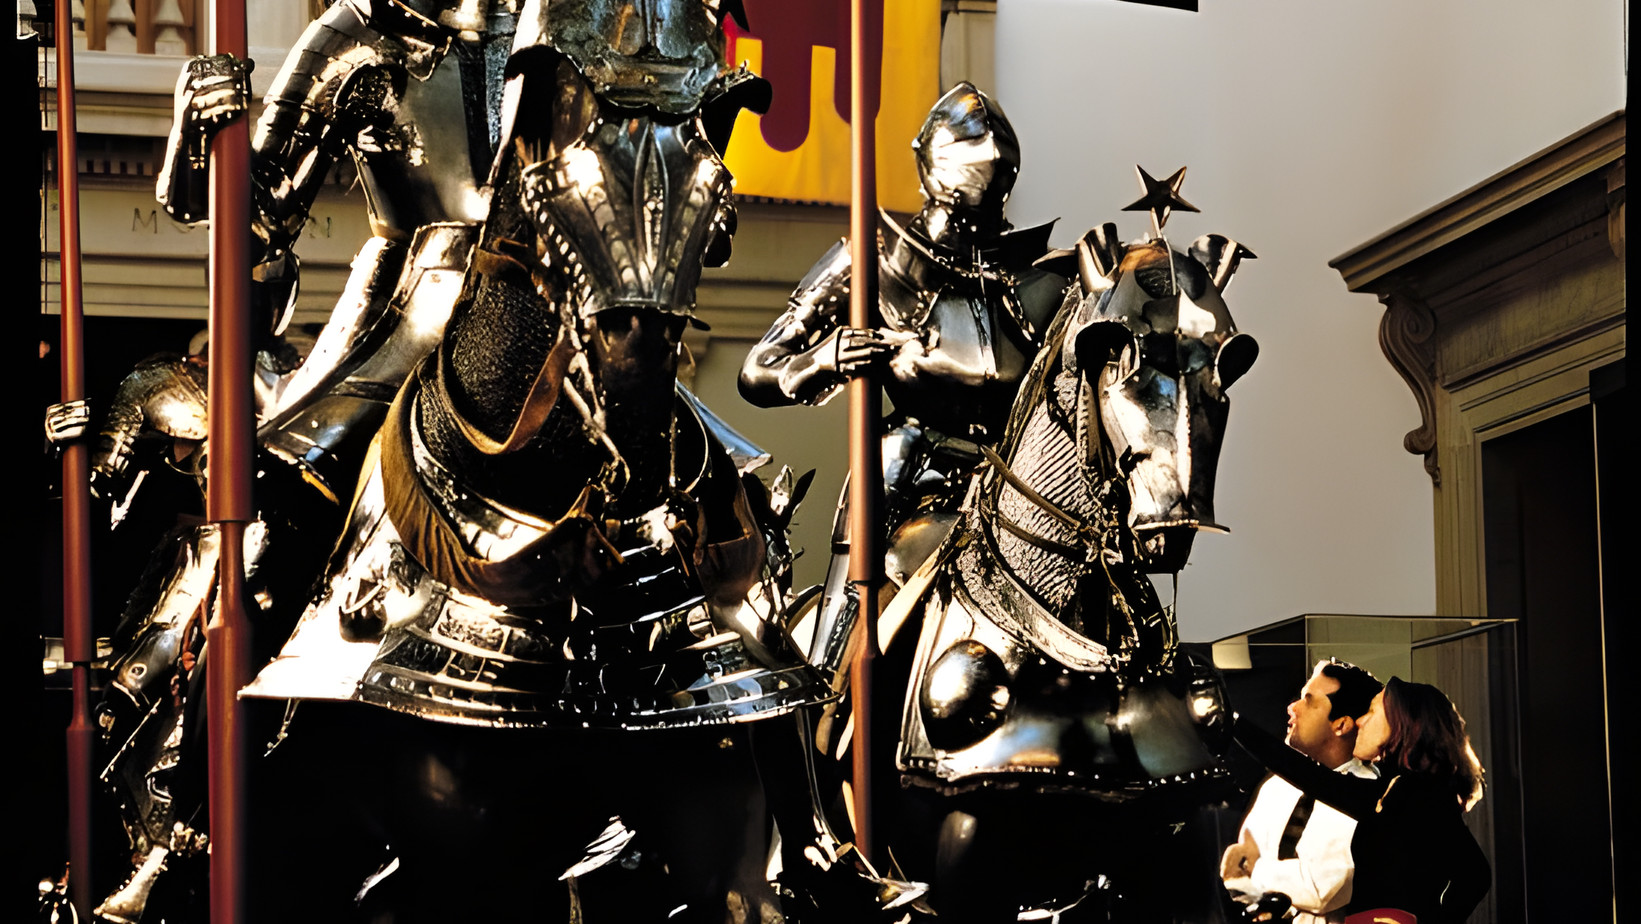 Knights and their armor-clad chargers pose in all their shining glory among the banners and high win- dows of the Equestrian Court at the Metropolitan Museum in New York City. The museum holds an exquisite collection of arms and armor.